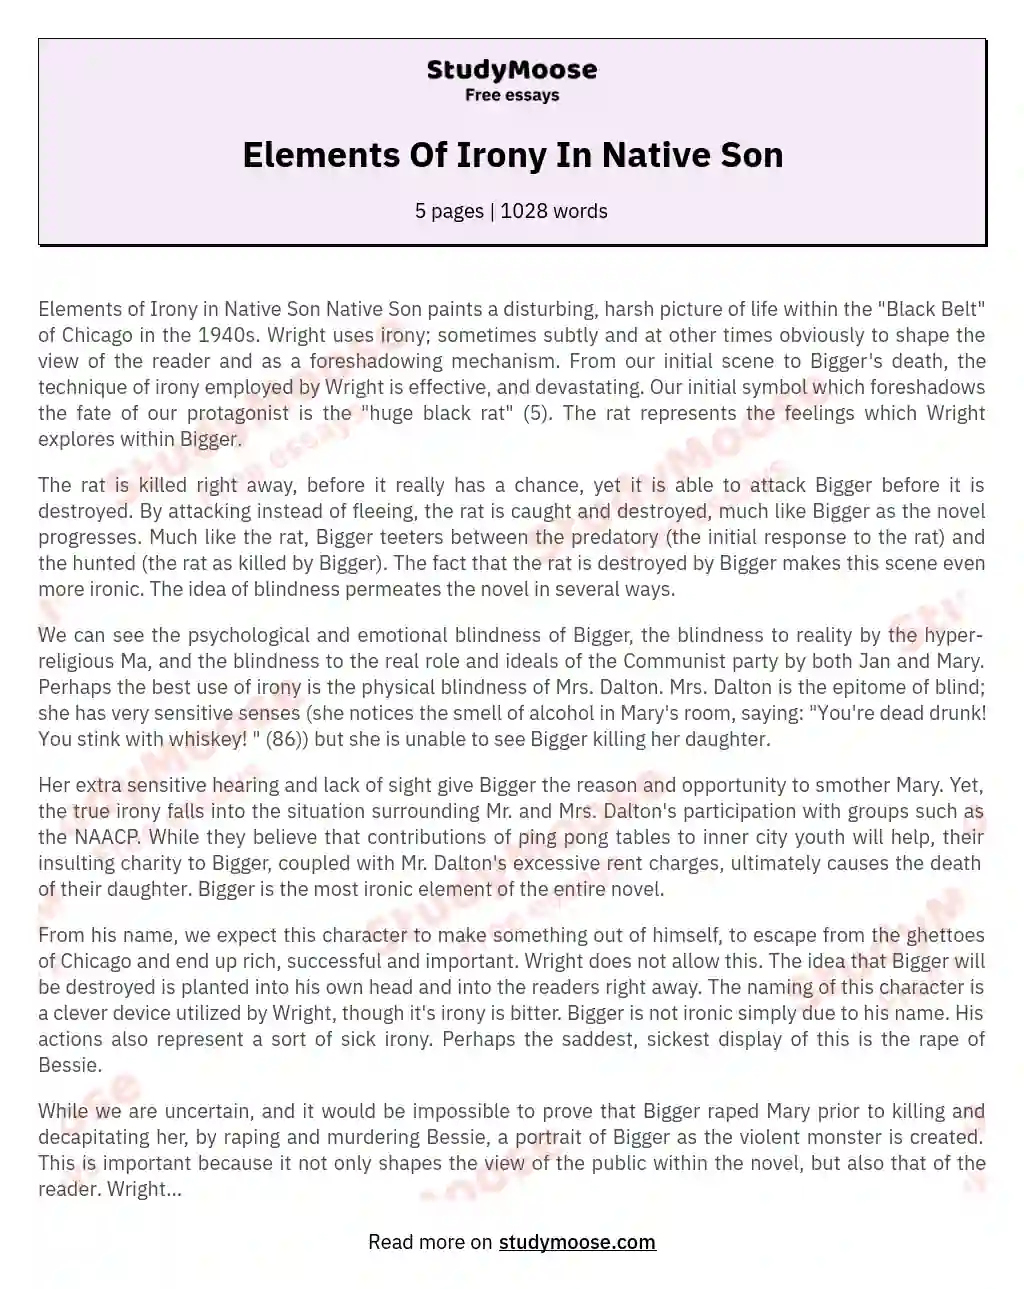 Elements Of Irony In Native Son essay